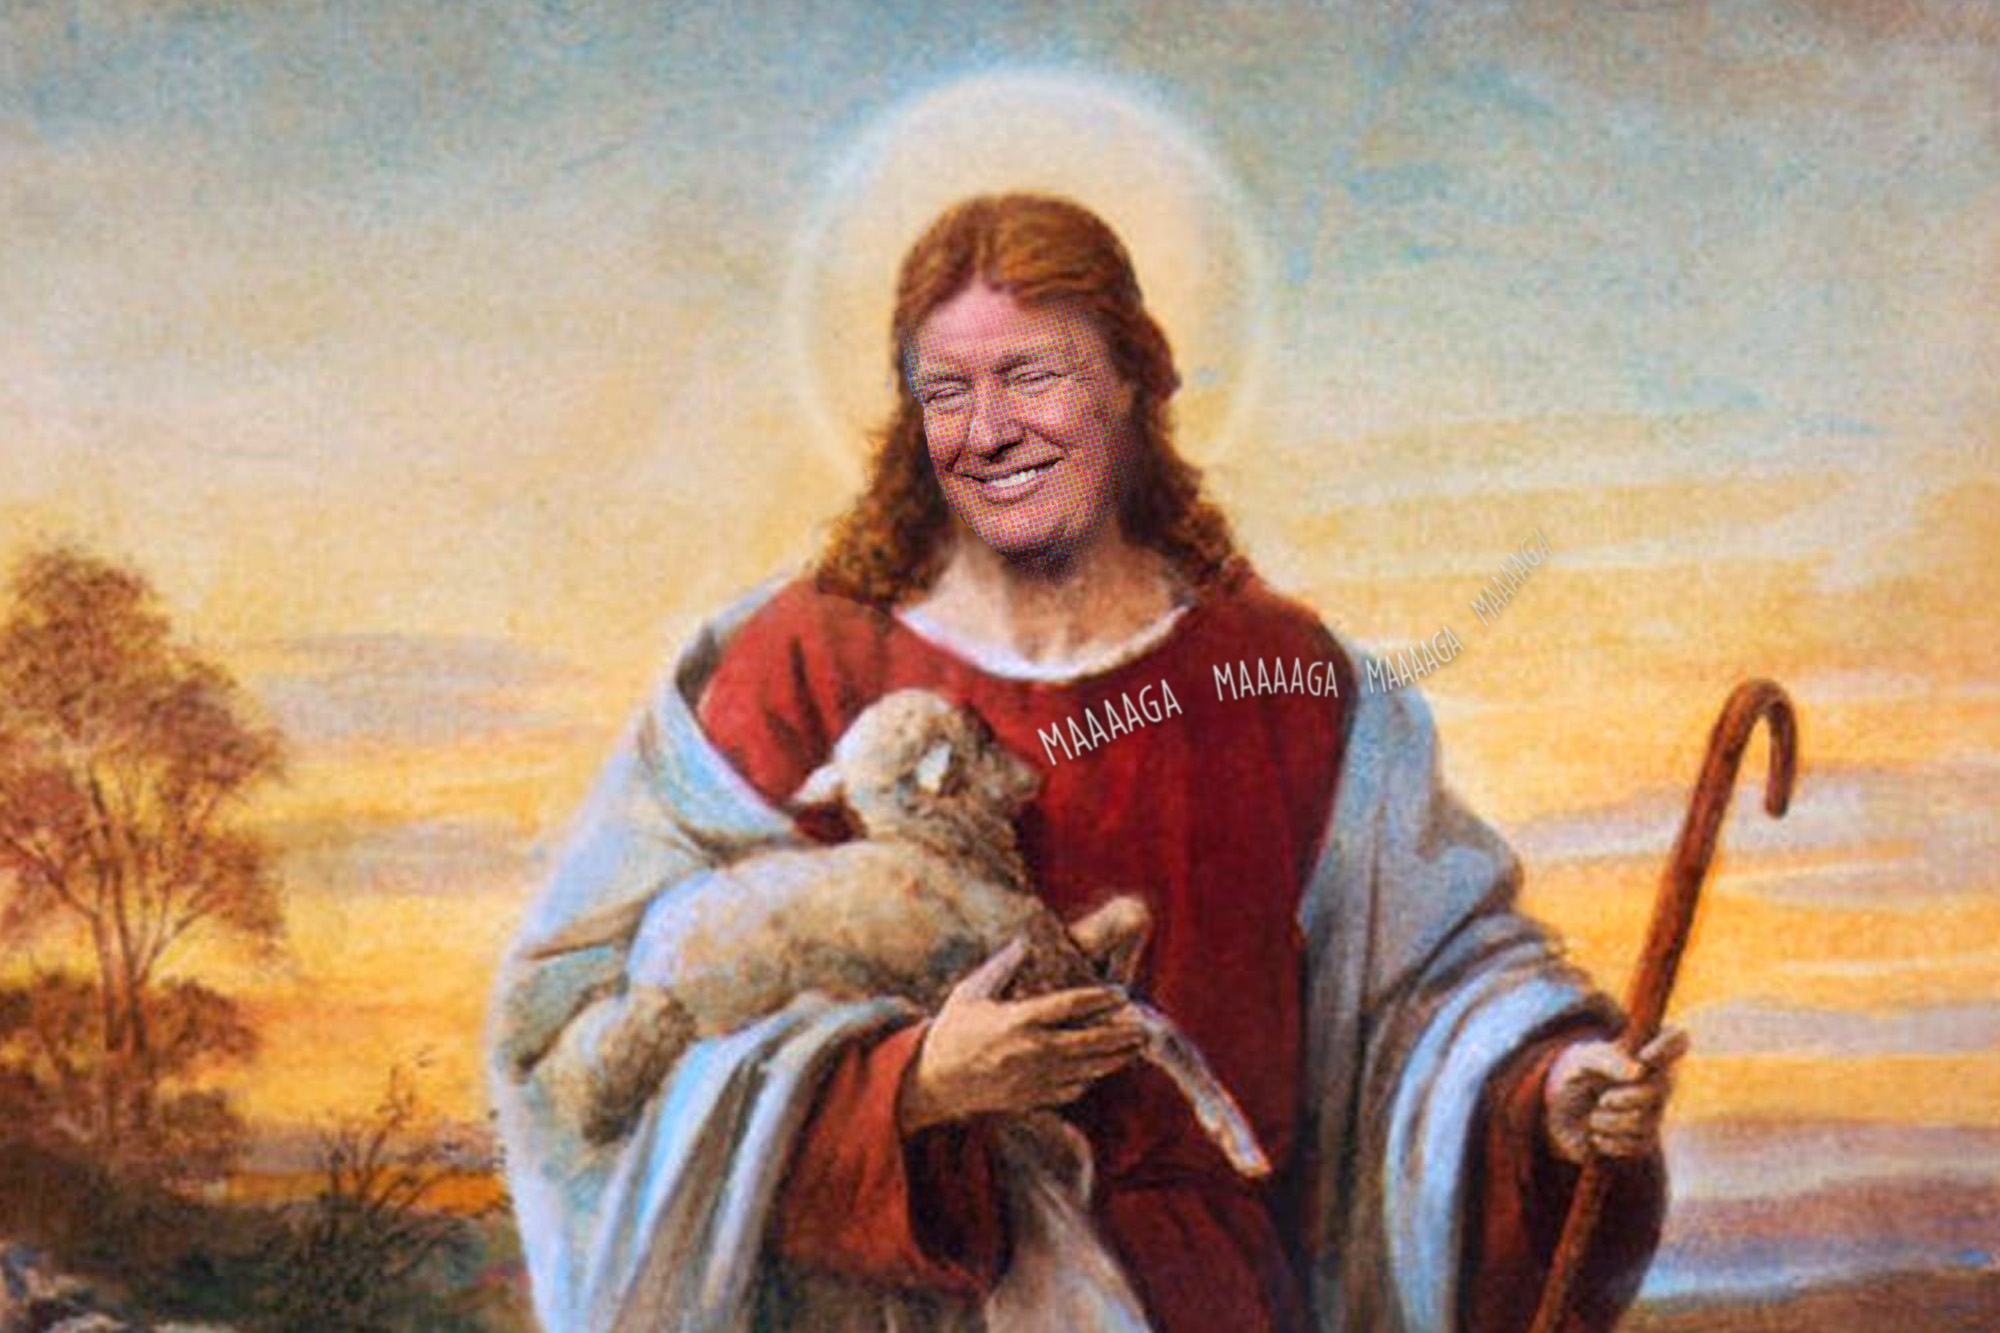 Trump: The Second Coming